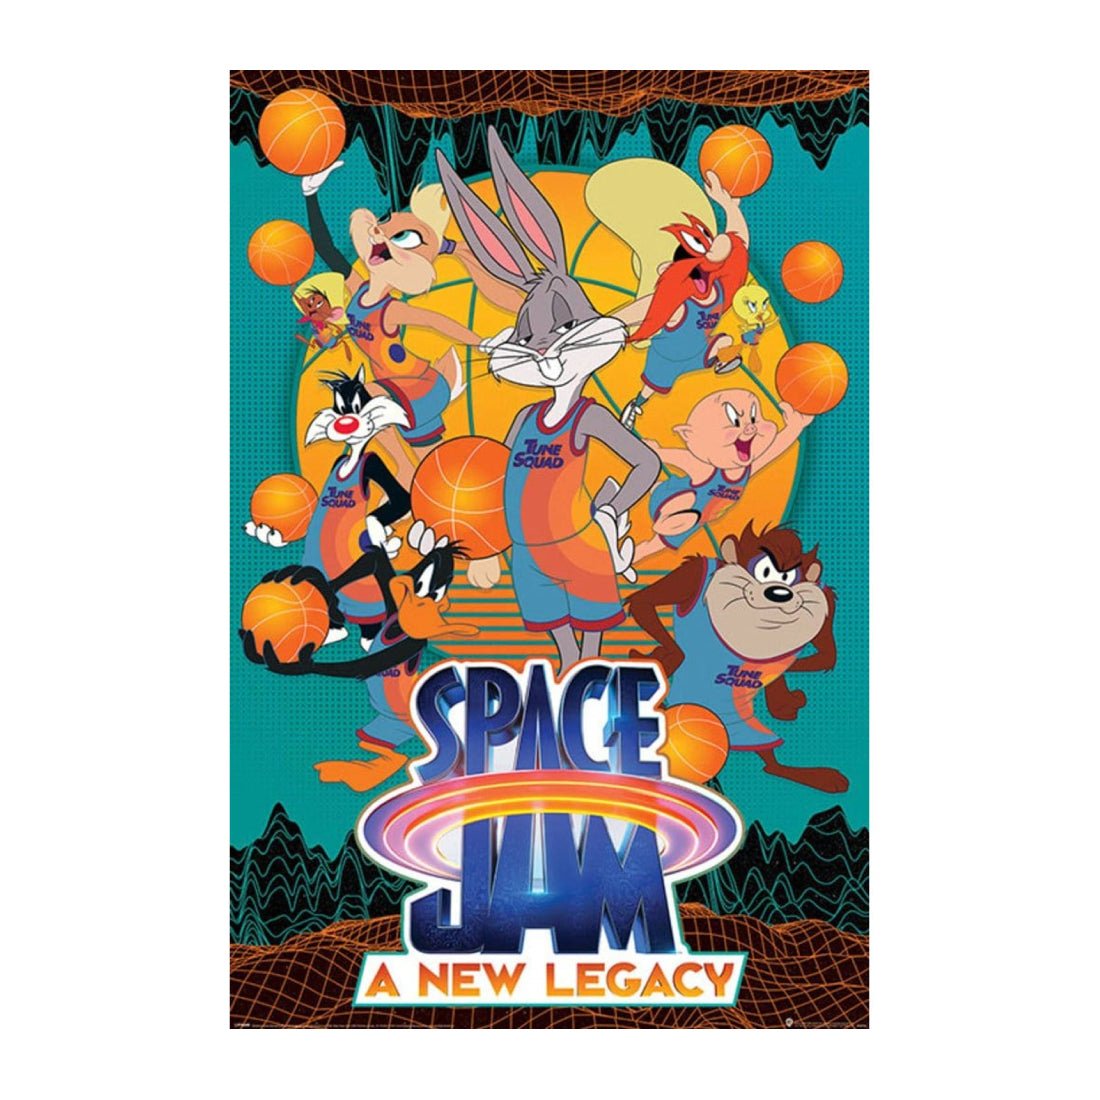 Space Jam 2 - A New Legacy Maxi Posters - أكسسوار - Store 974 | ستور ٩٧٤